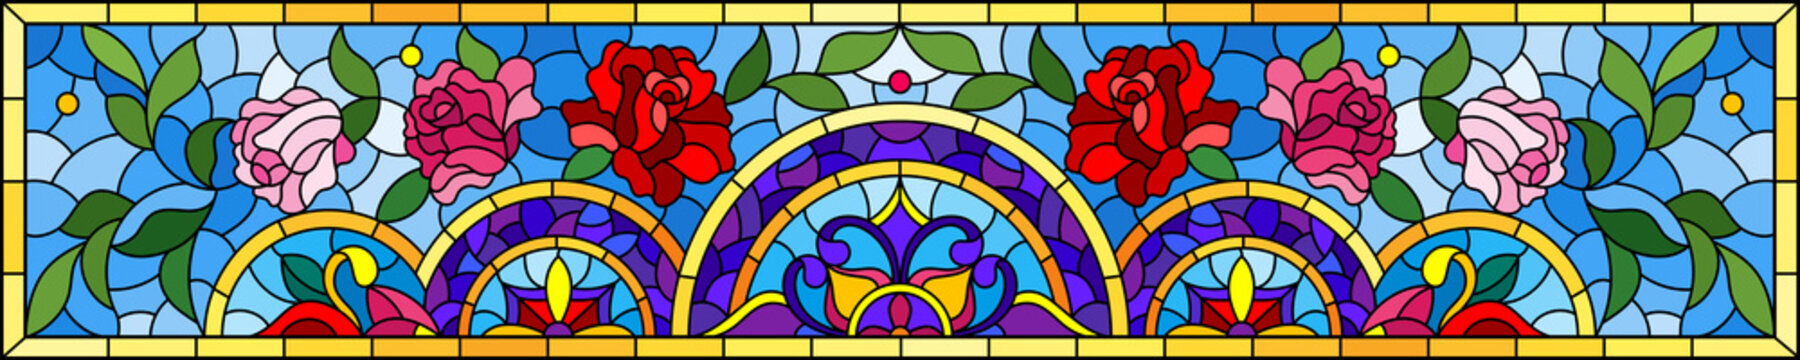 Illustration in the stained glass style with an abstract flower arrangement on a light blue background, horizontal image